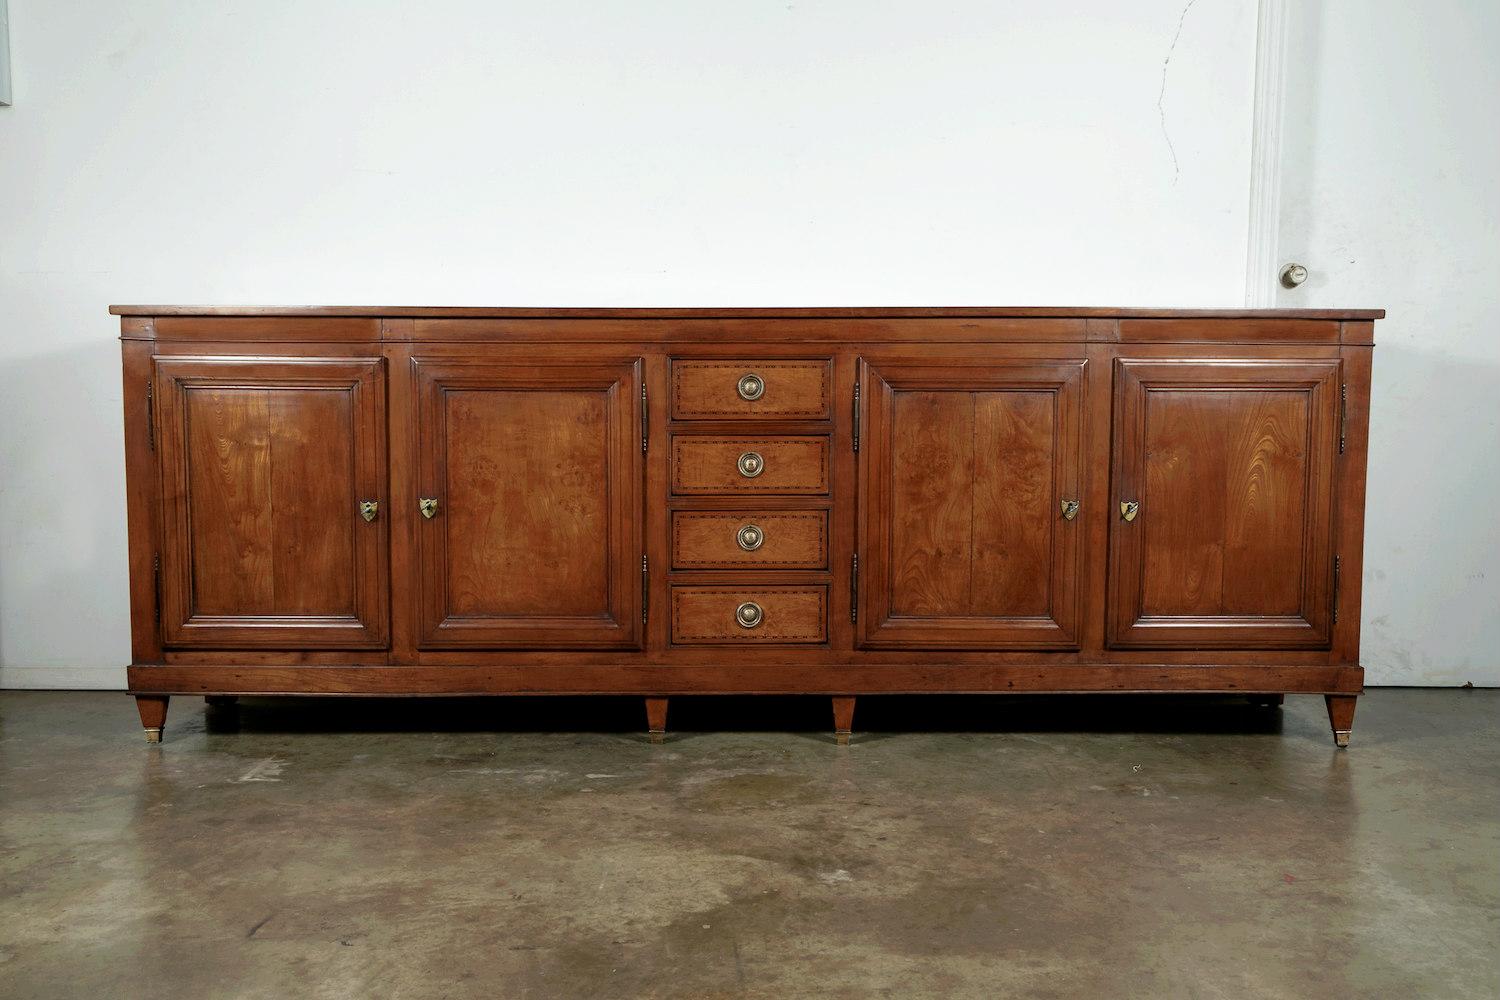 A grand scale 18th century Louis XVI period enfilade handcrafted of cherrywood and burled chestnut with fruitwood inlay by skilled artisans in Provence. This exceptional buffet is almost 9.5 feet long and has a center section comprised of four